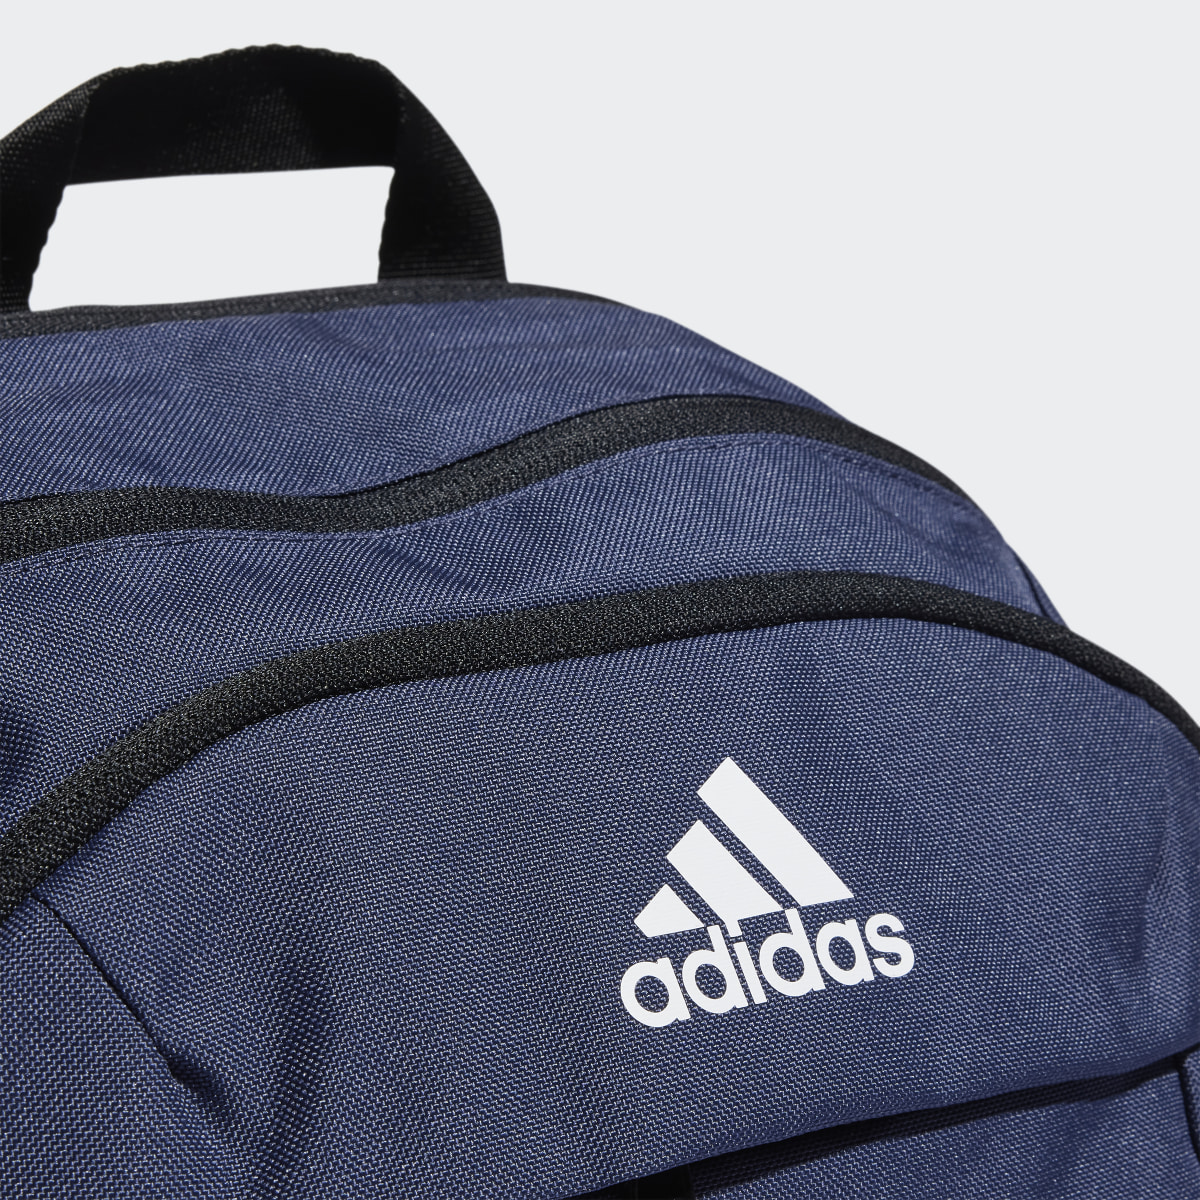 Adidas Power Backpack. 6